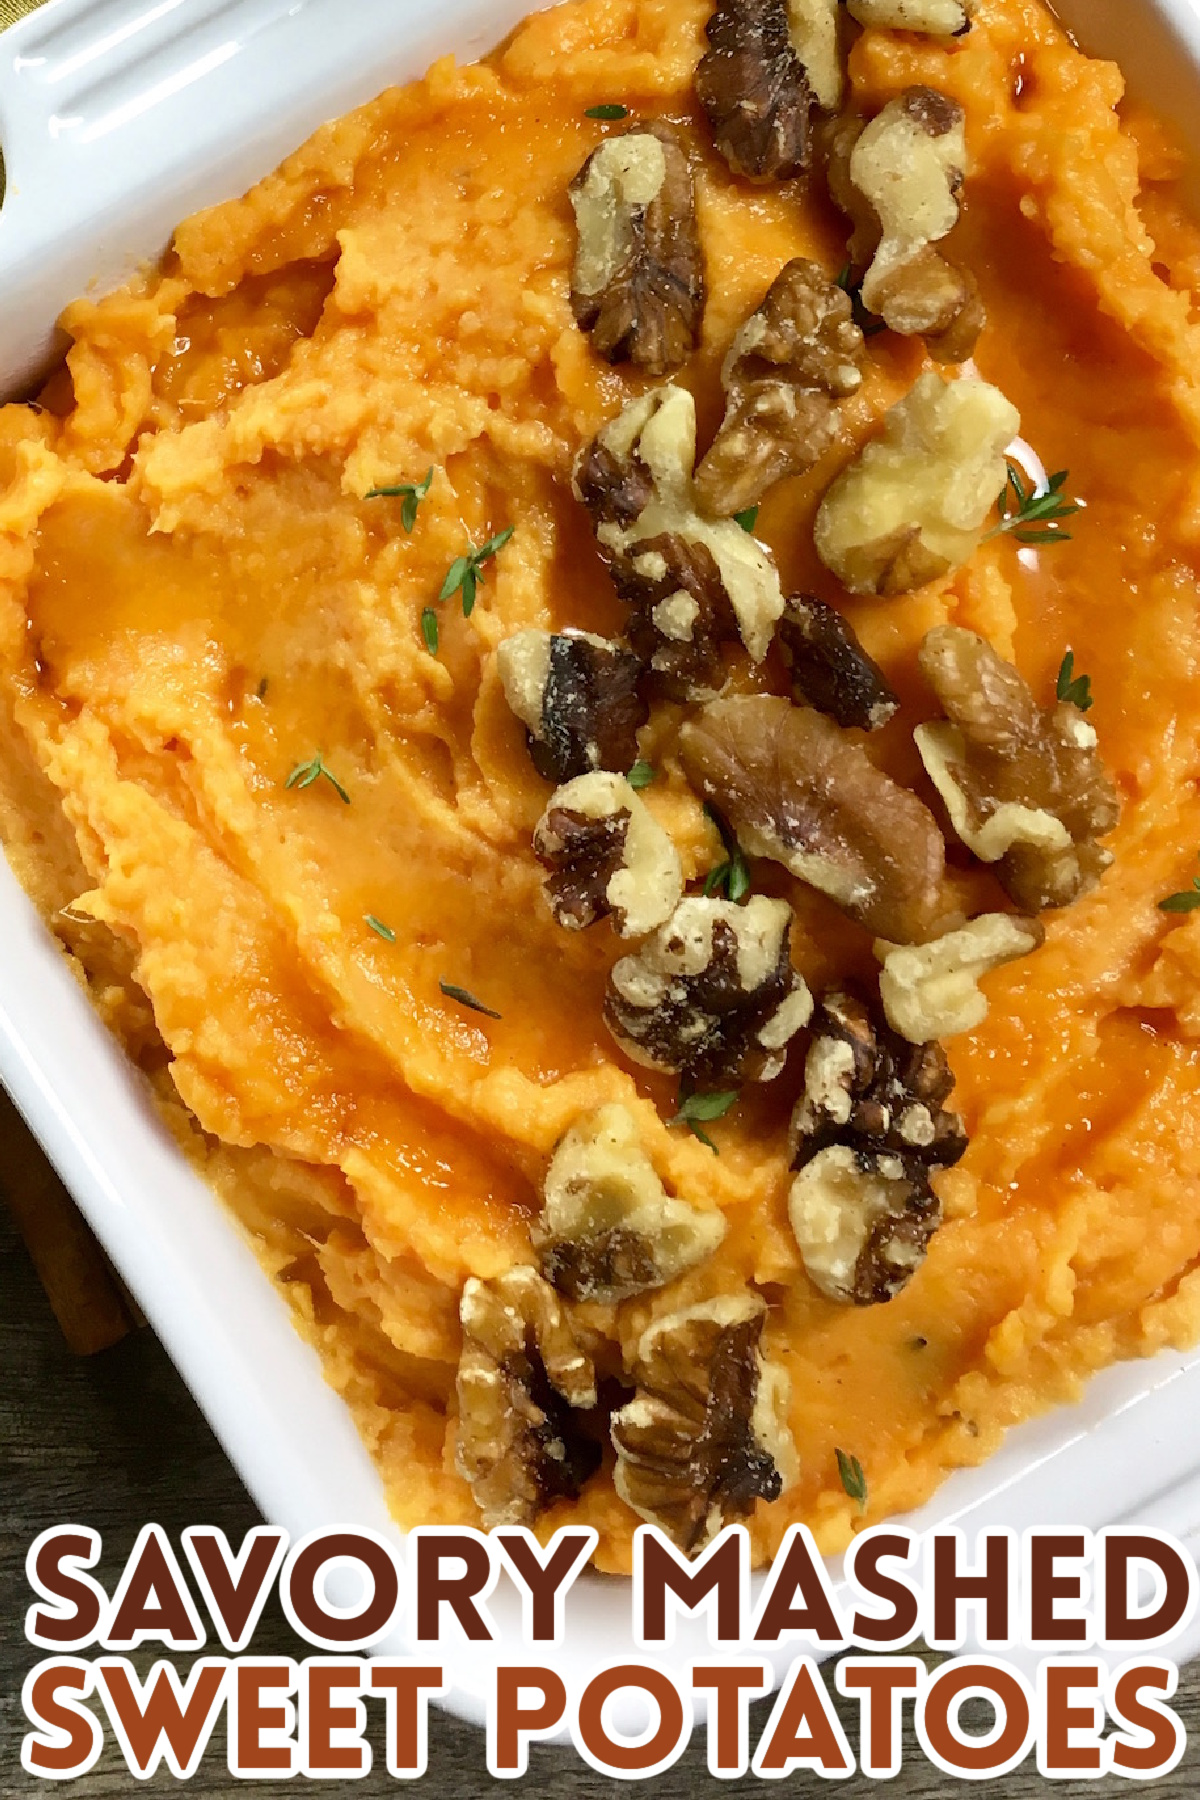 This savory mashed sweet potato recipe is lightly spiced and creamy, making them the perfect side dish to complete any fall meal.